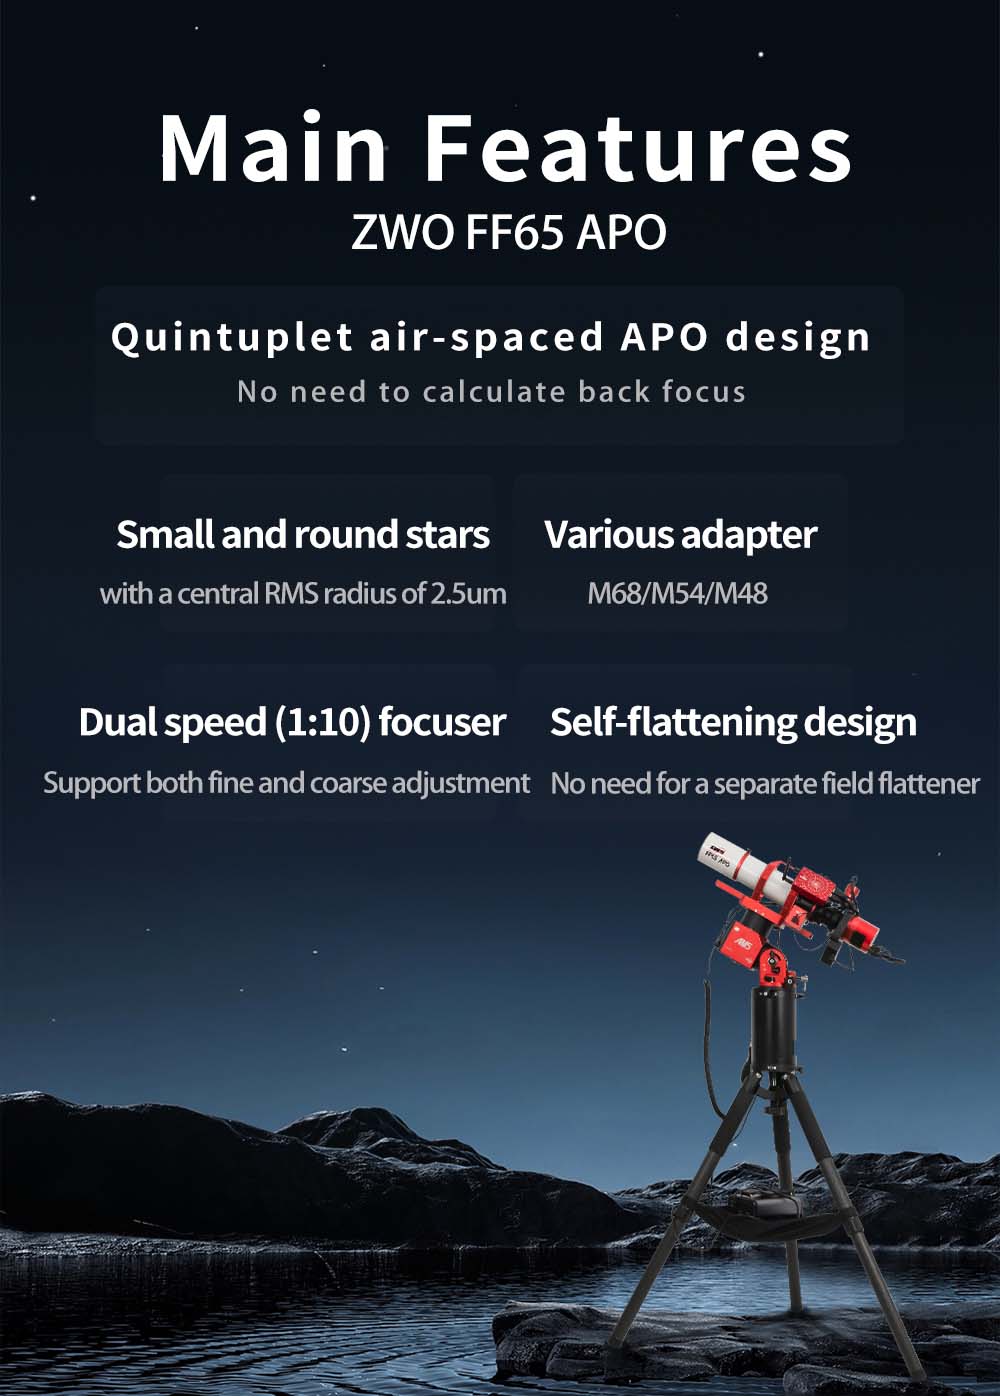 ZWO FF65 f/6.4 Apochromatic Quintuplet Refractor Telescope Features